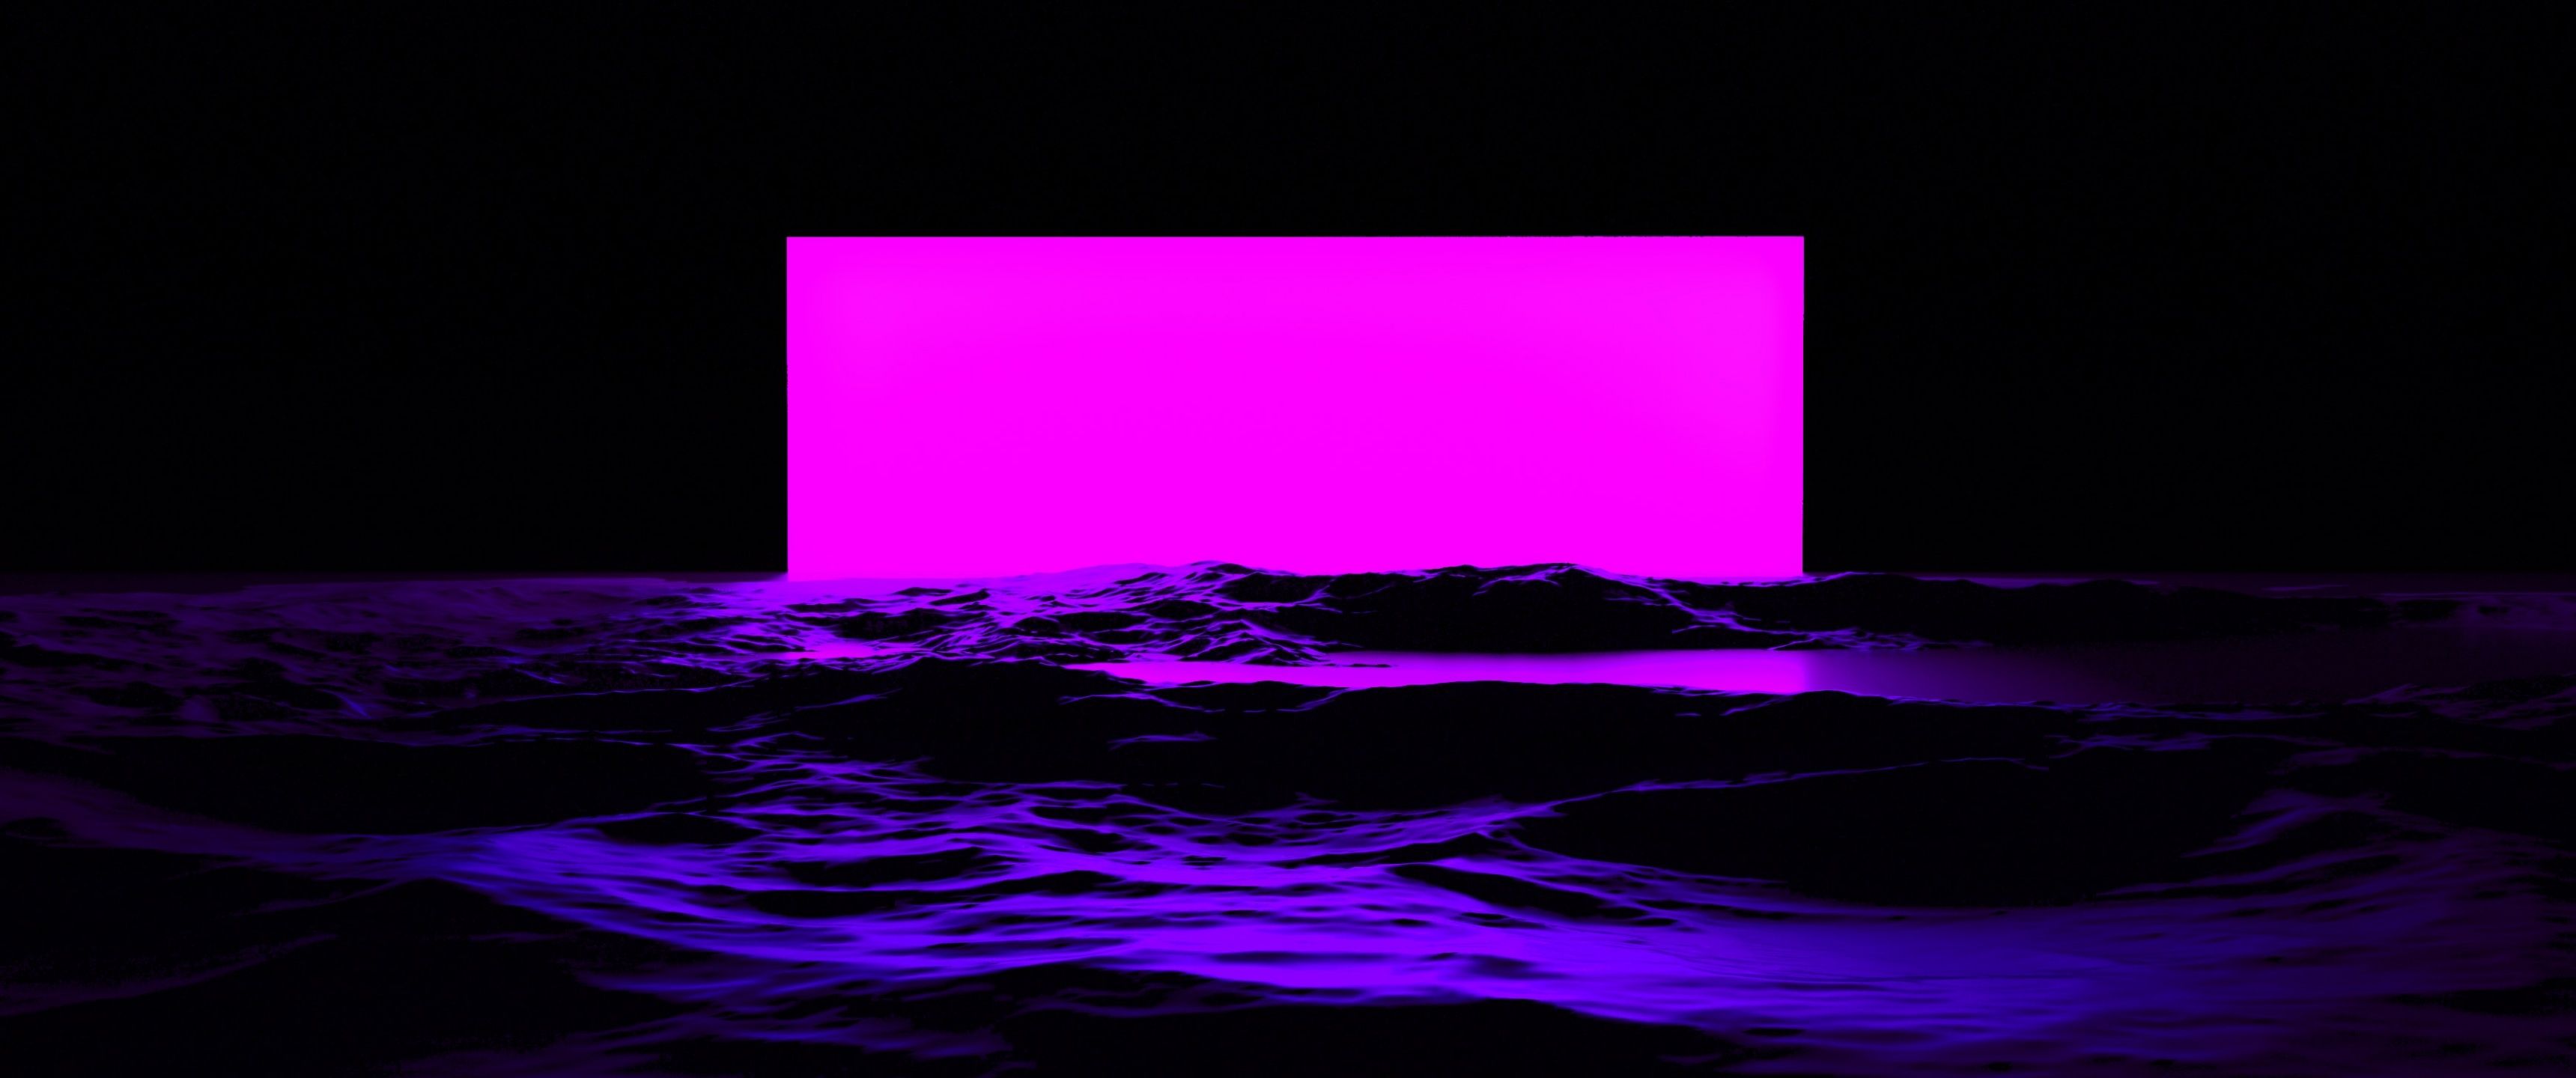 A purple square in the middle of water - Dark vaporwave, 3440x1440